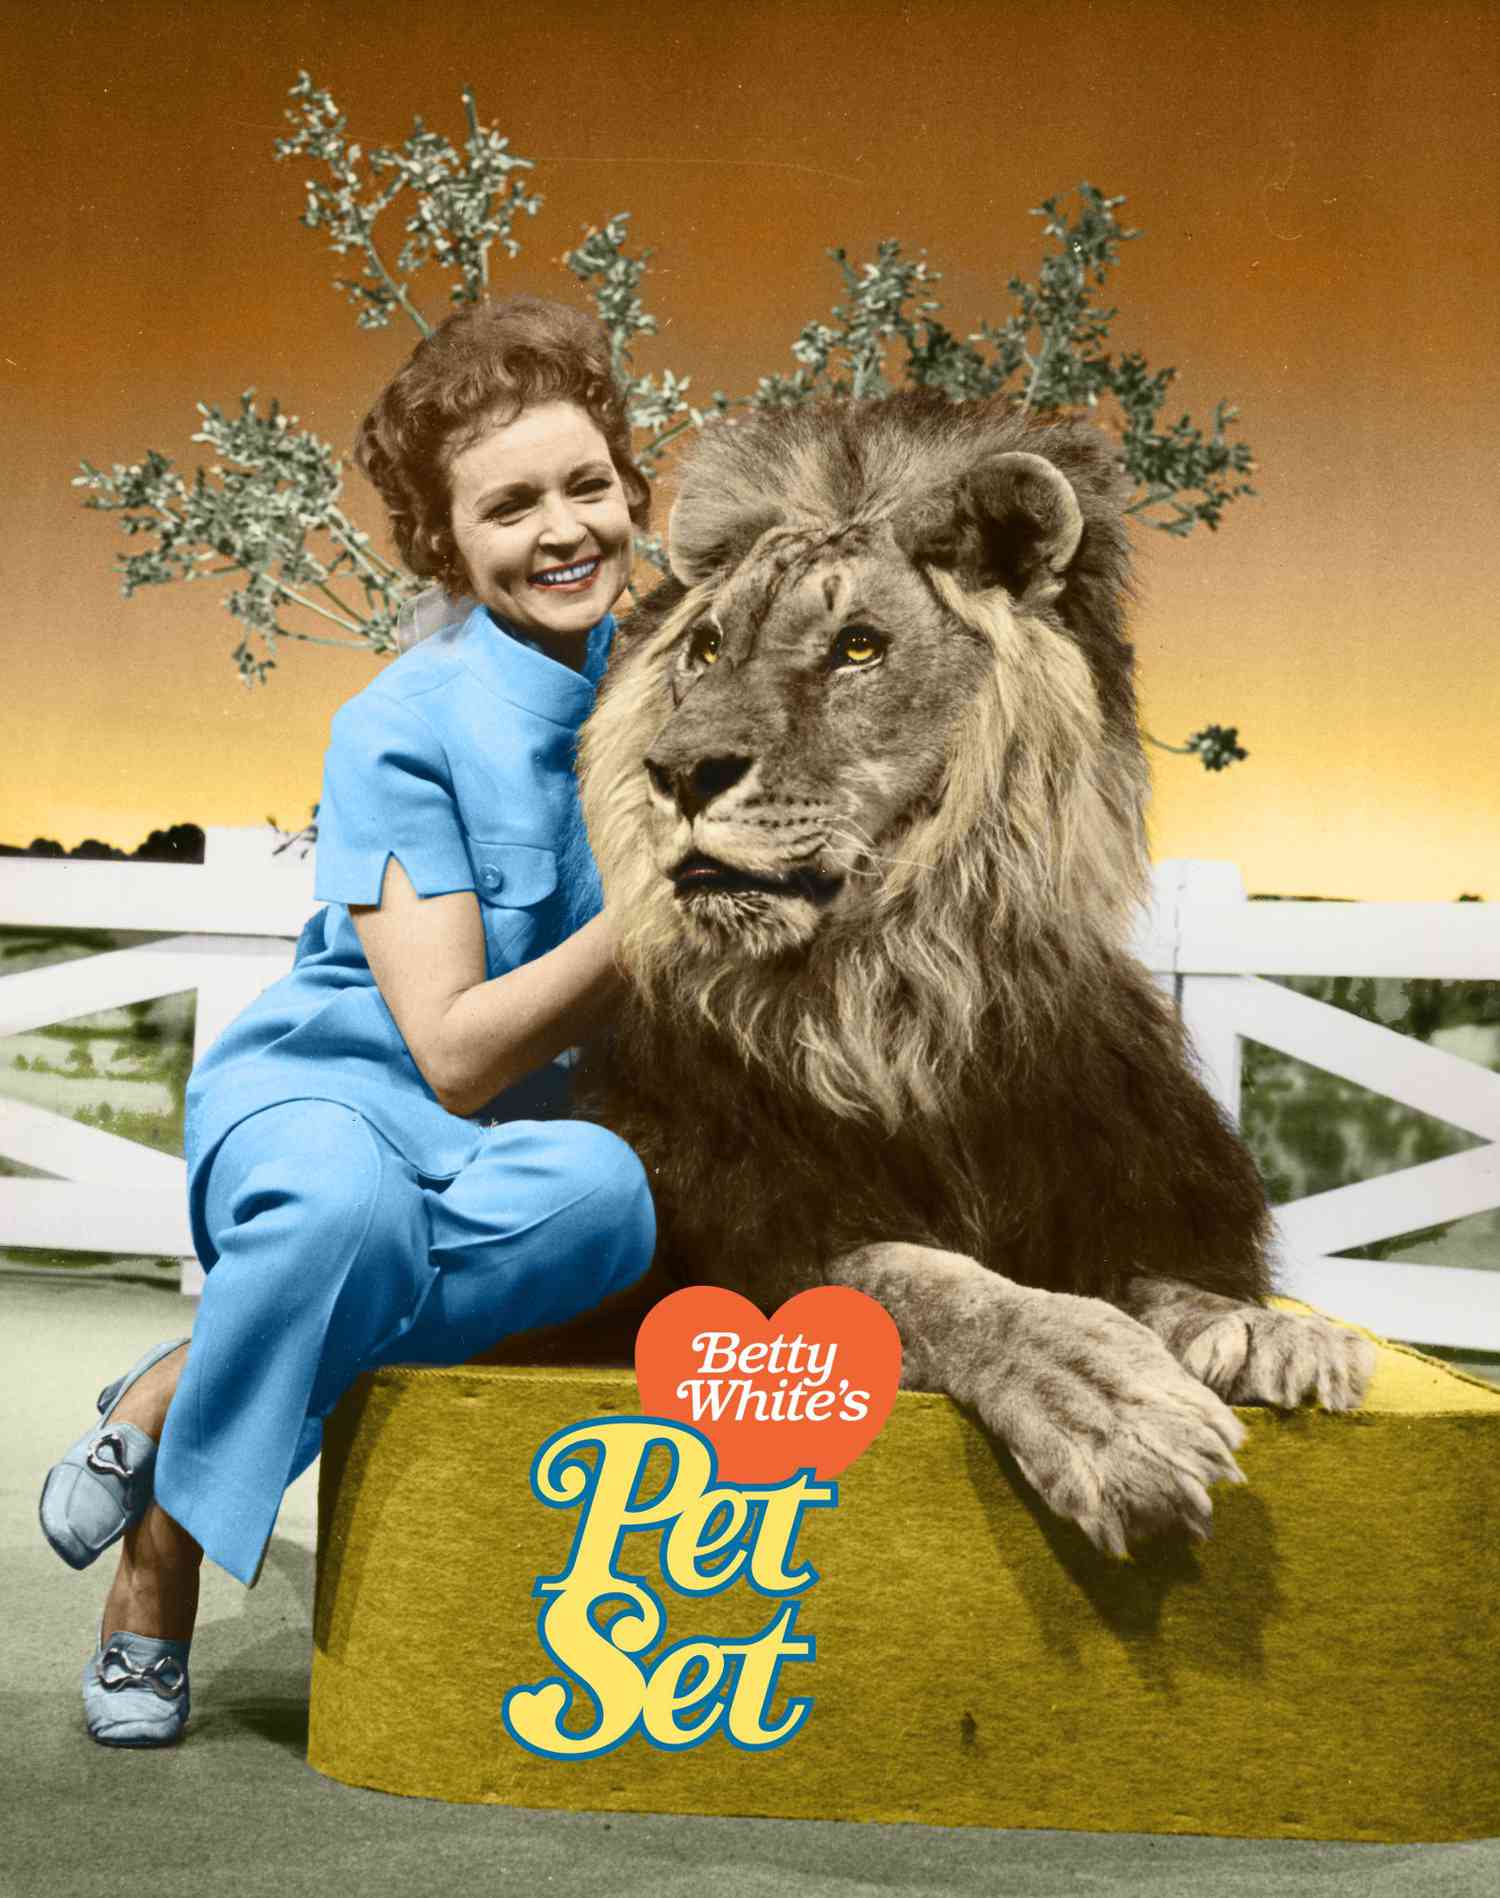 Betty White and her lion friend on The Pet Set